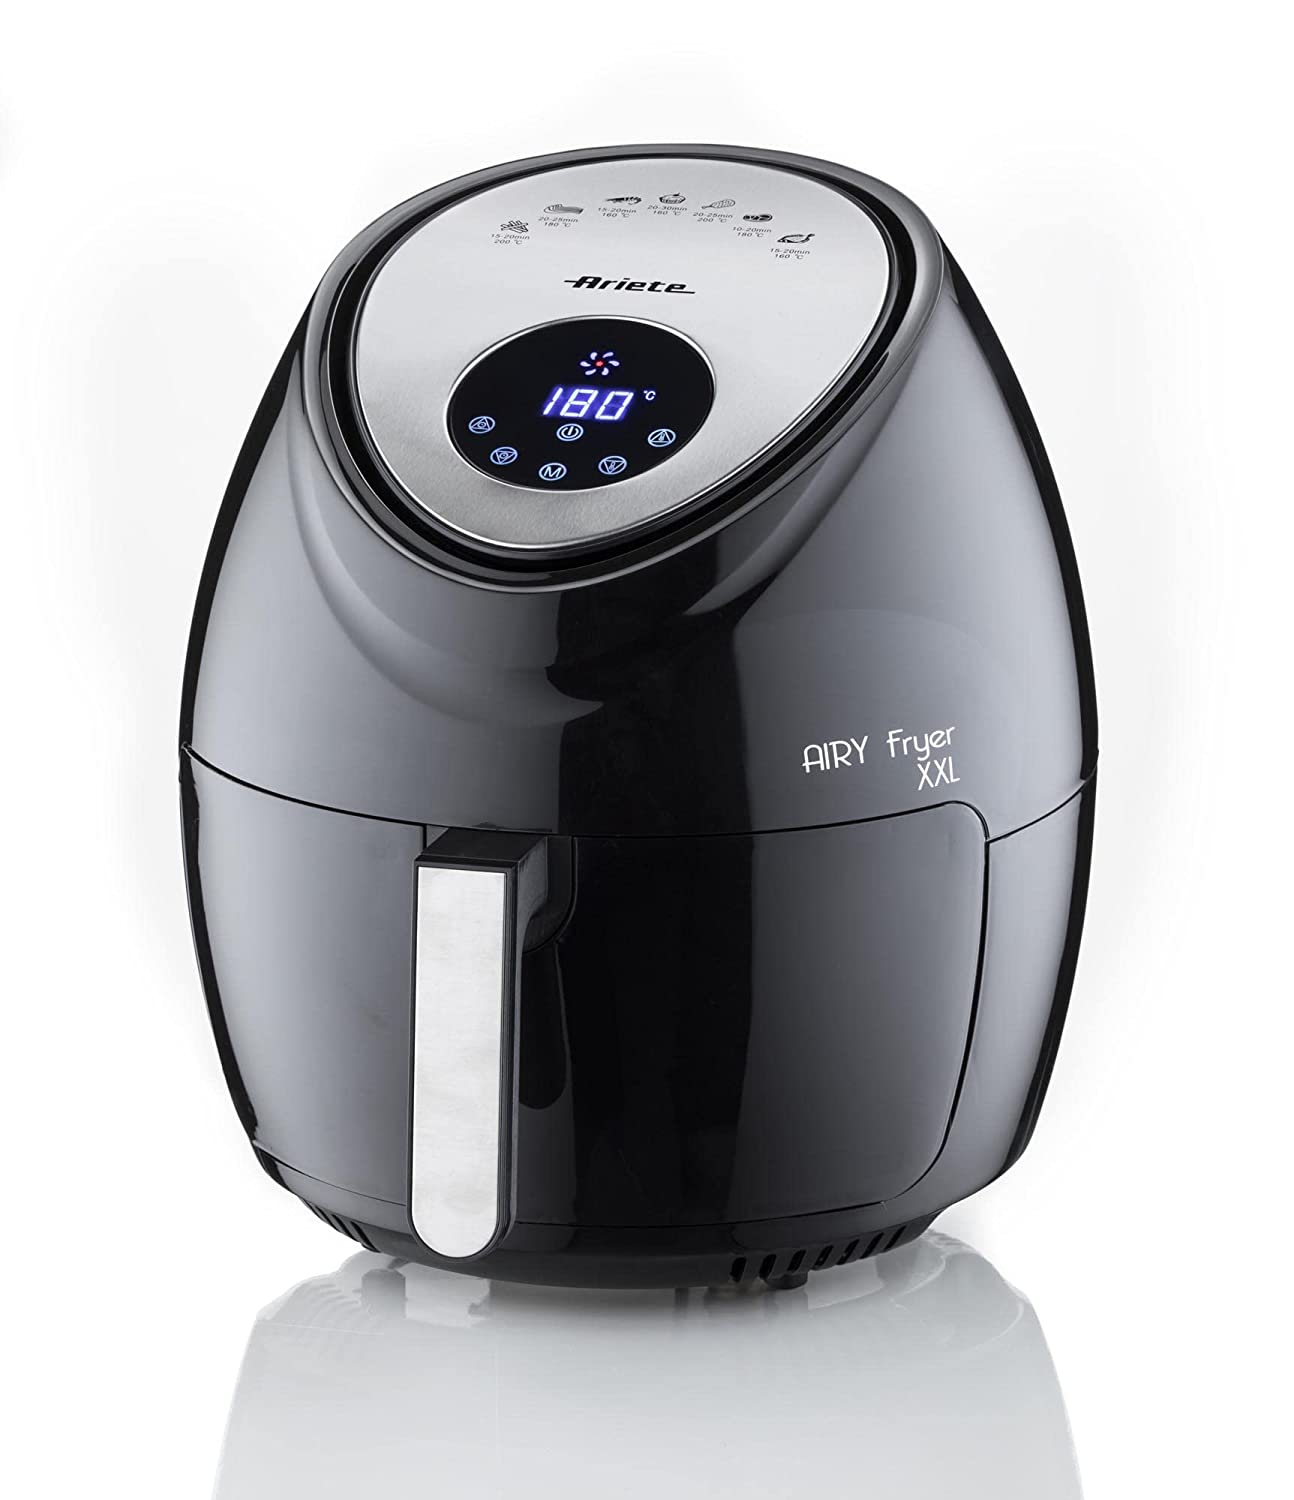 Ariete 4618 Airy Fryer XXL, Air Fryer, 5.5 Liters, Fries Without Oil 2